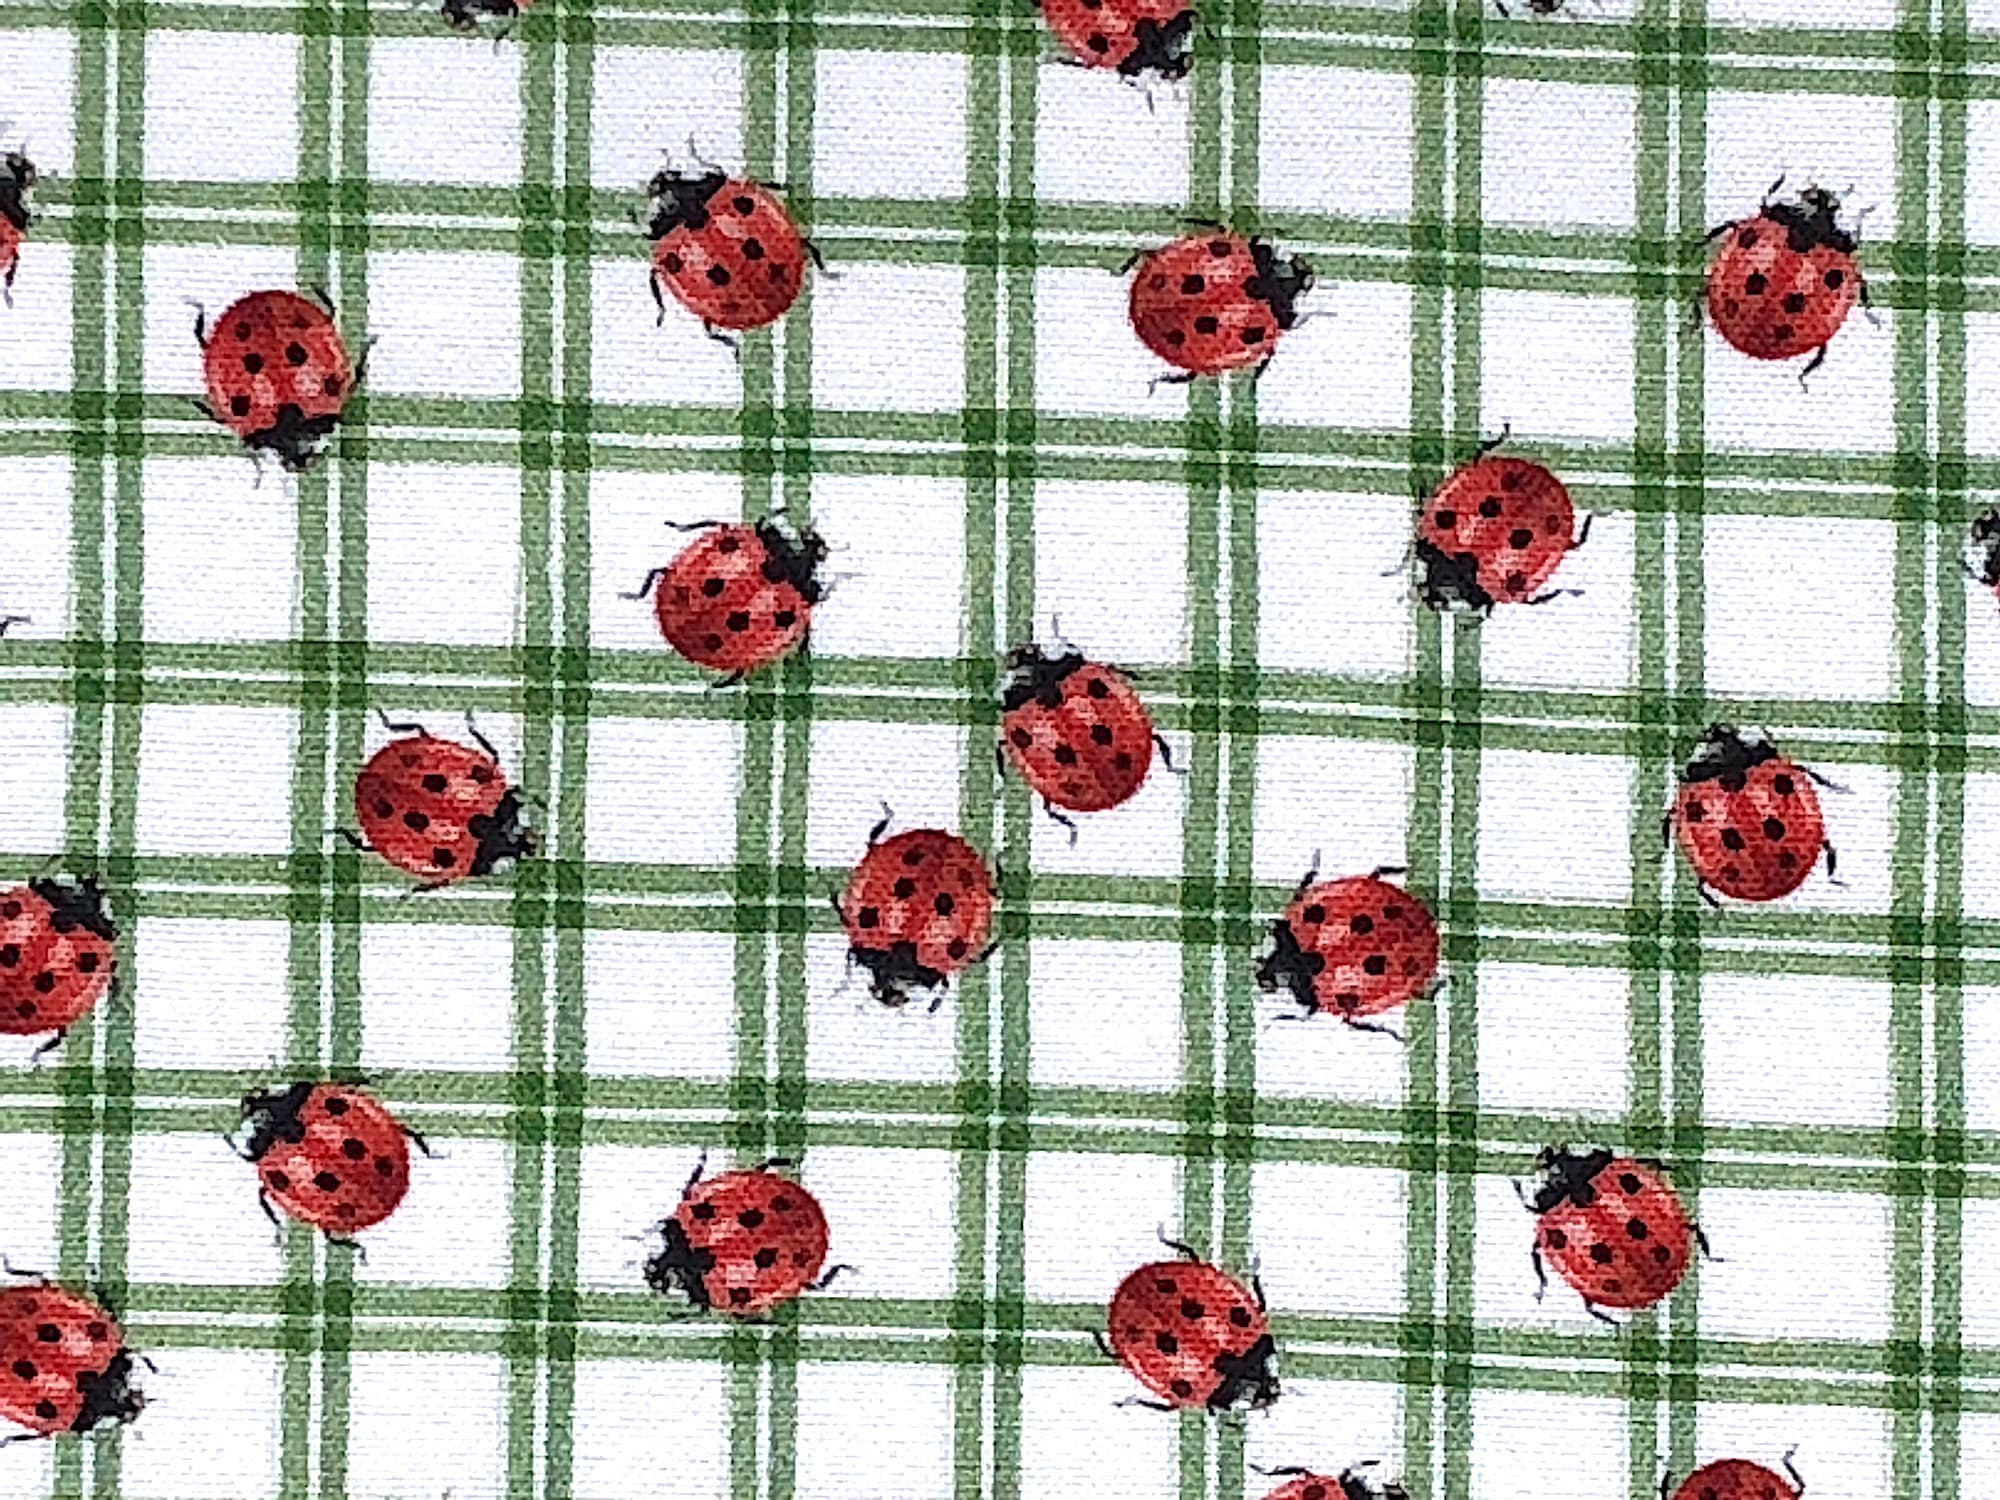 Close up of red ladybugs with black dots on a white and green background.